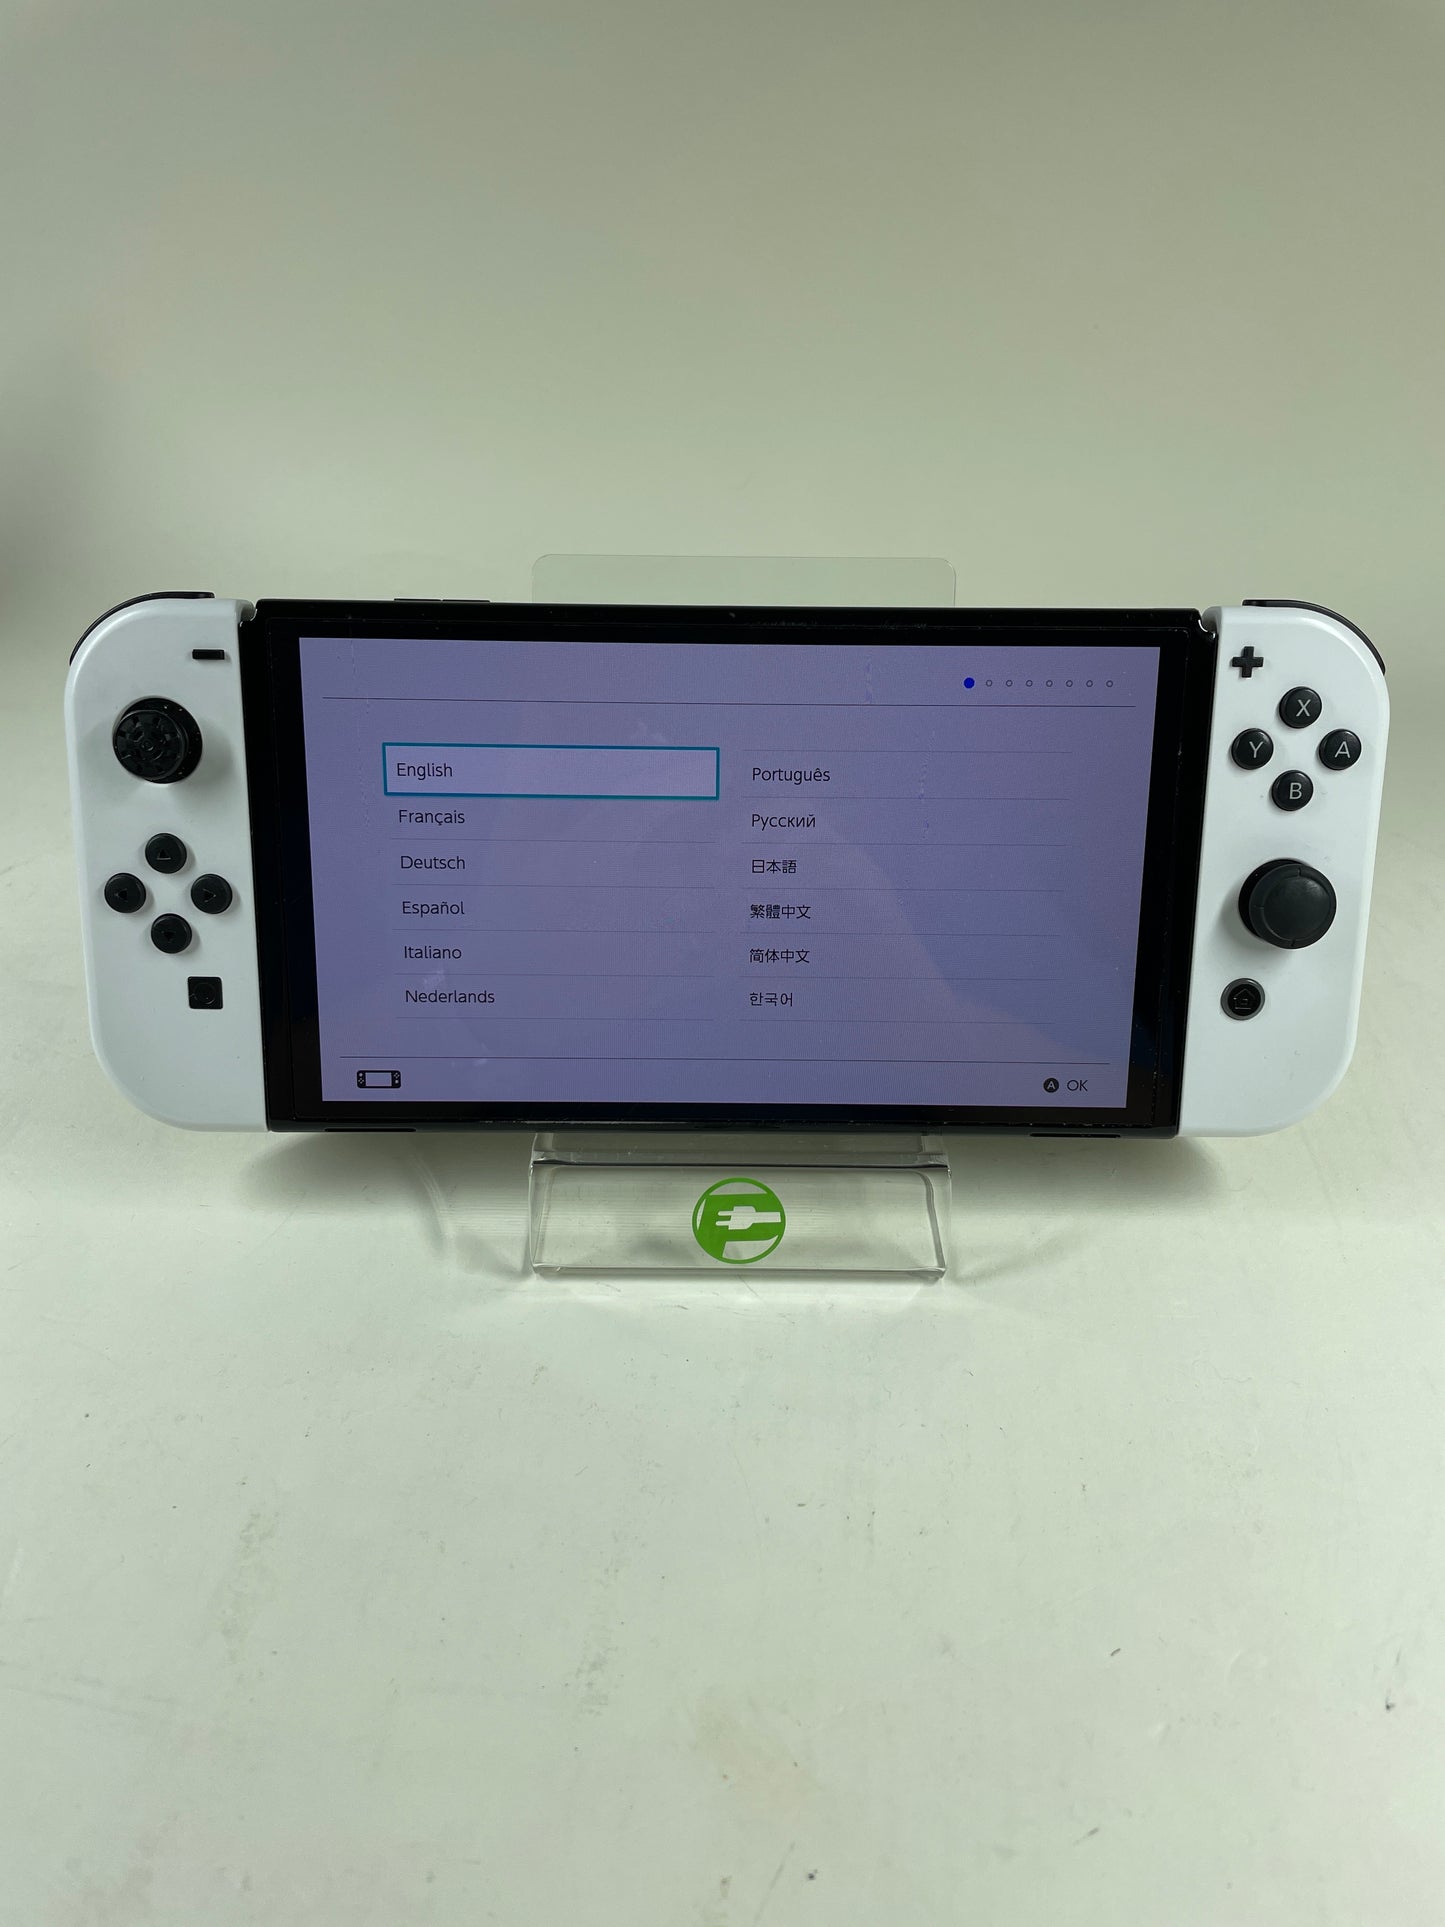 Nintendo Switch OLED Video Game Console HEG-001 White